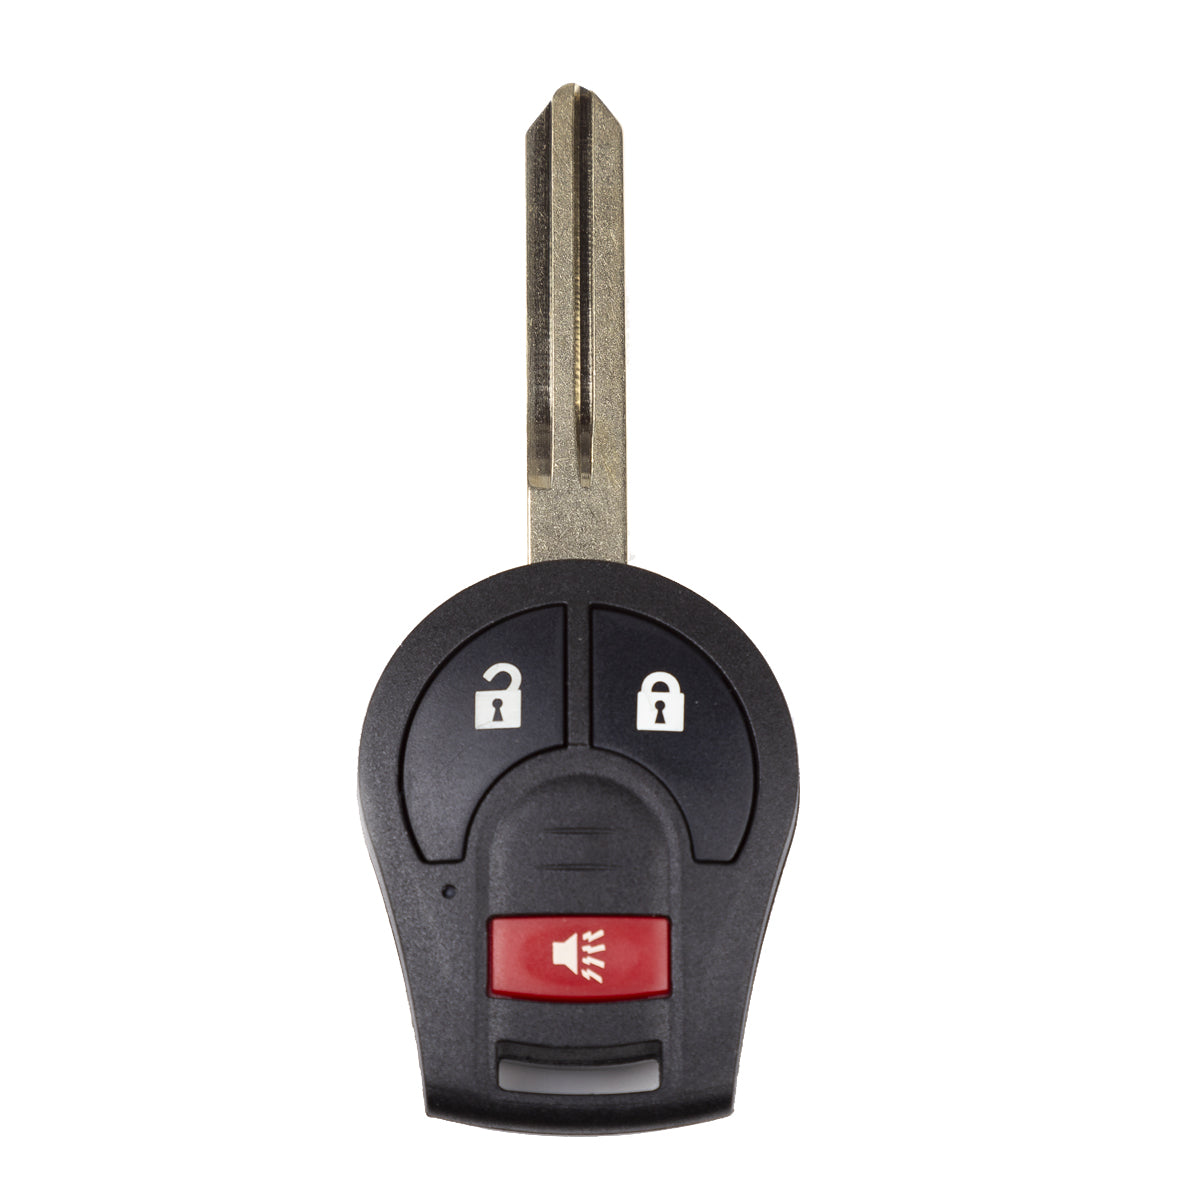 2008 Nissan Murano Key Fob Replacement - Aftermarket - 3 Buttons Fob FCC# CWTWB1U751